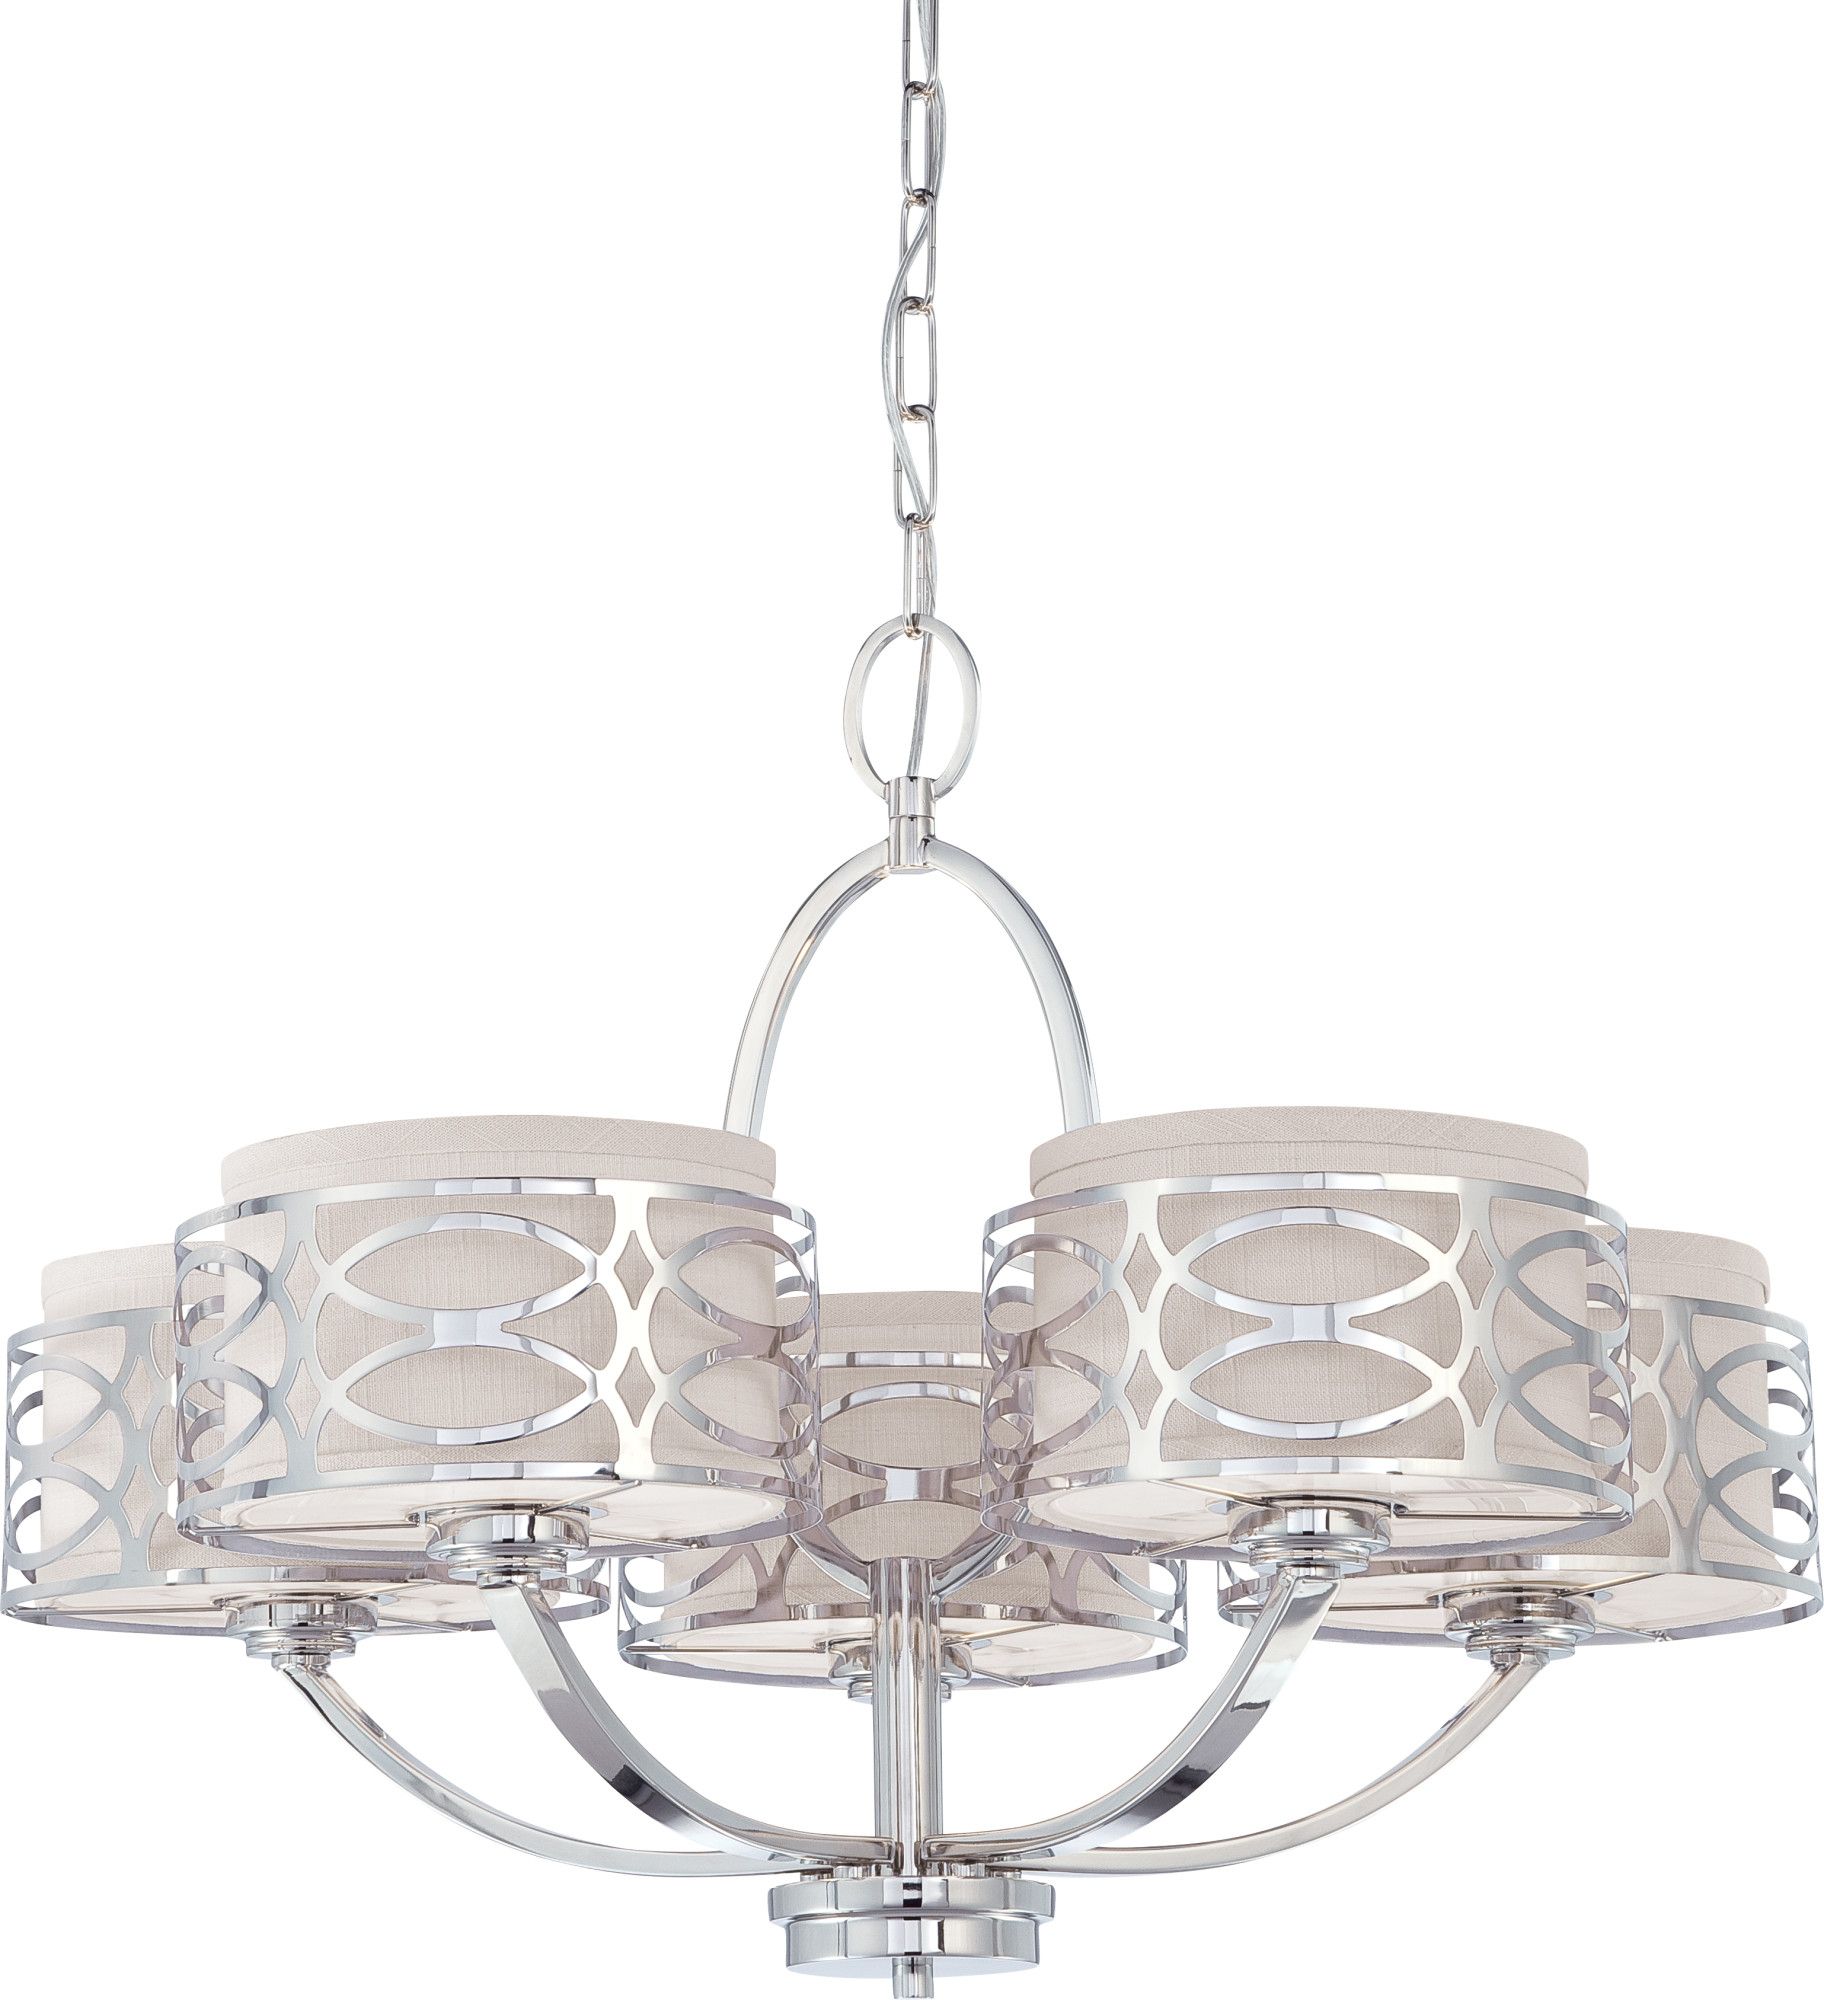 5 Light – Chandelier – Slate Gray Fabric Shades – Walmart With Stone Gray And Nickel Chandeliers (View 4 of 15)